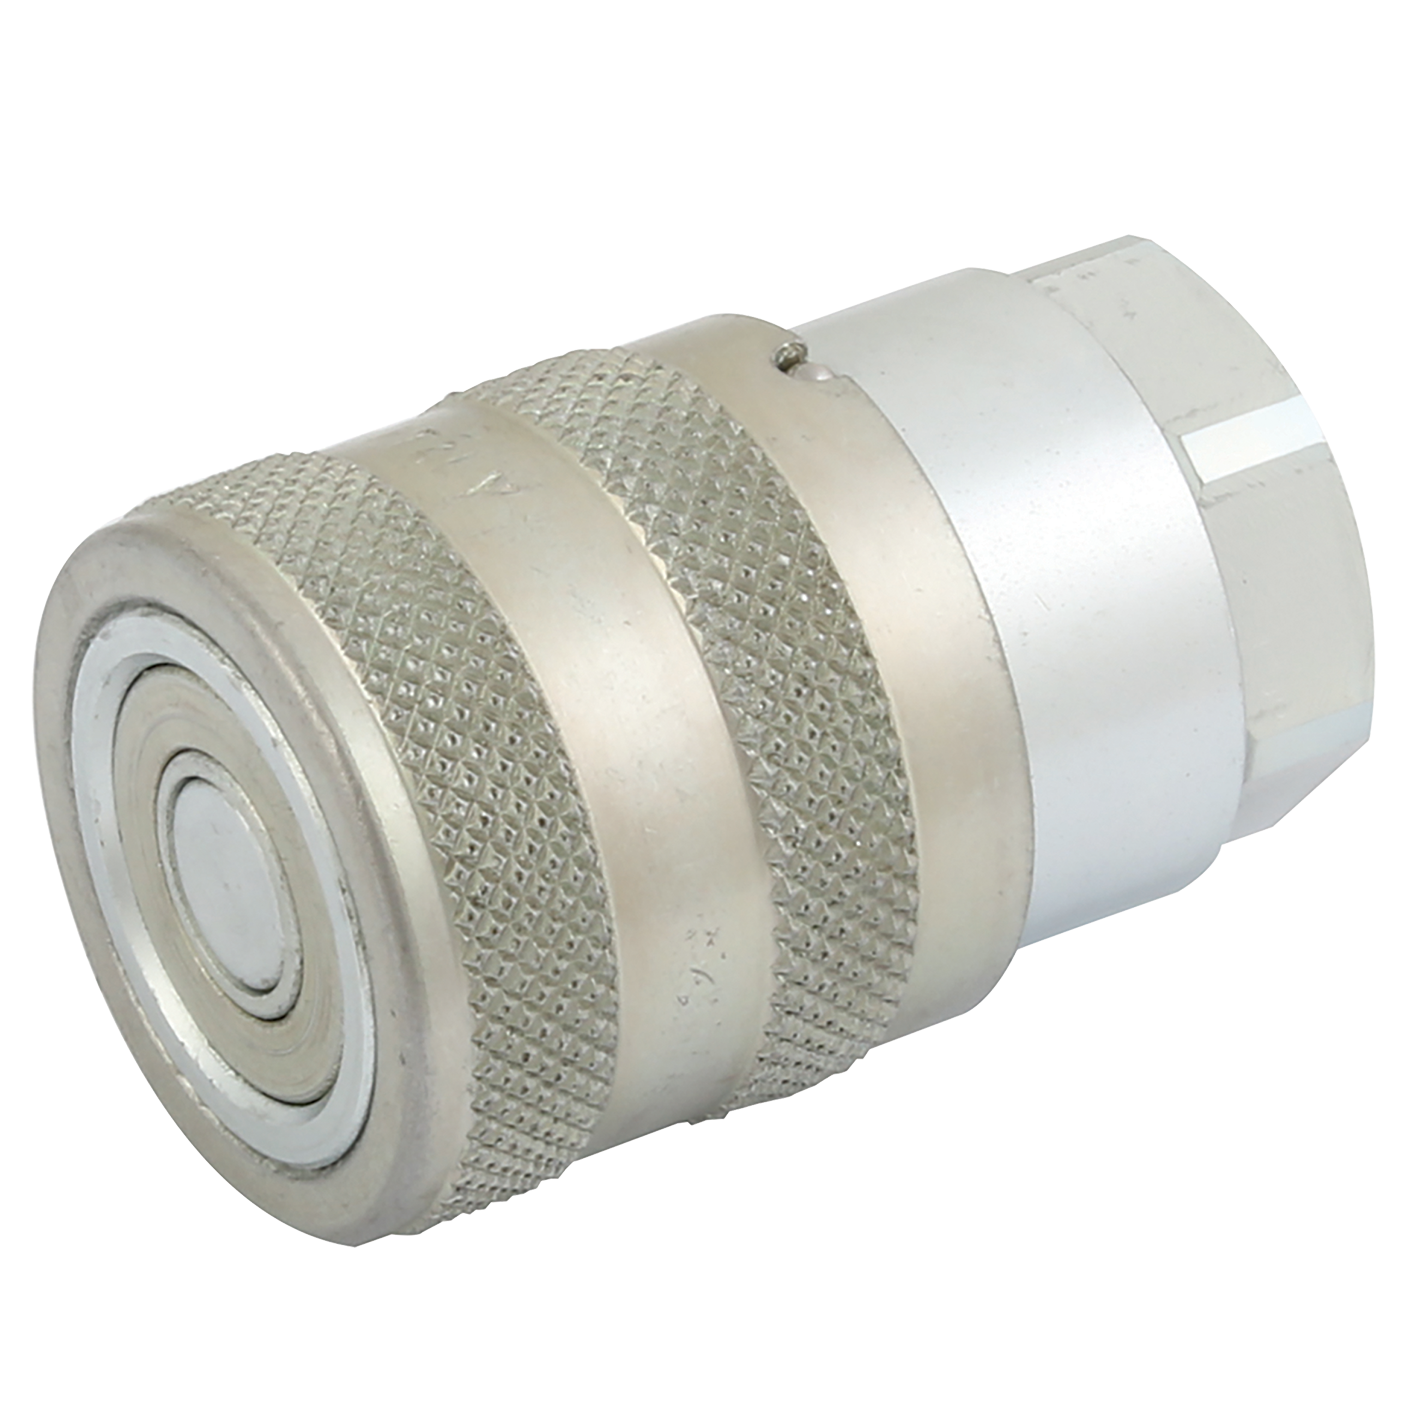 1.1/4" BSP Female Hydraulic Quick Release Coupling